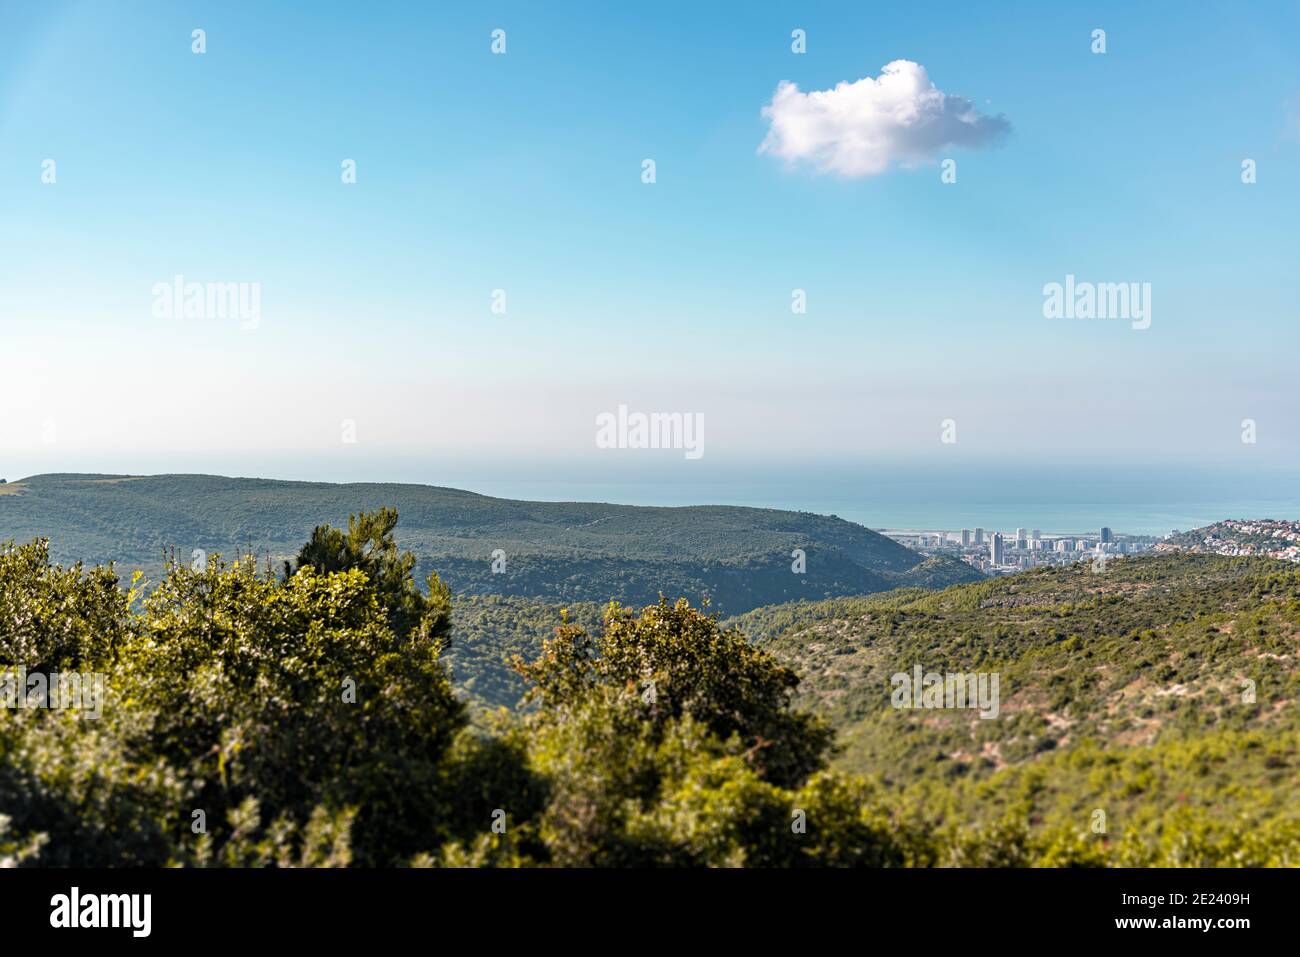 View of forest, sea, and city under a blue sky. A view of Mount Carmel, Little Switzerland, overlooking the city of Haifa from above. Israel. High Quality photo Stock Photo